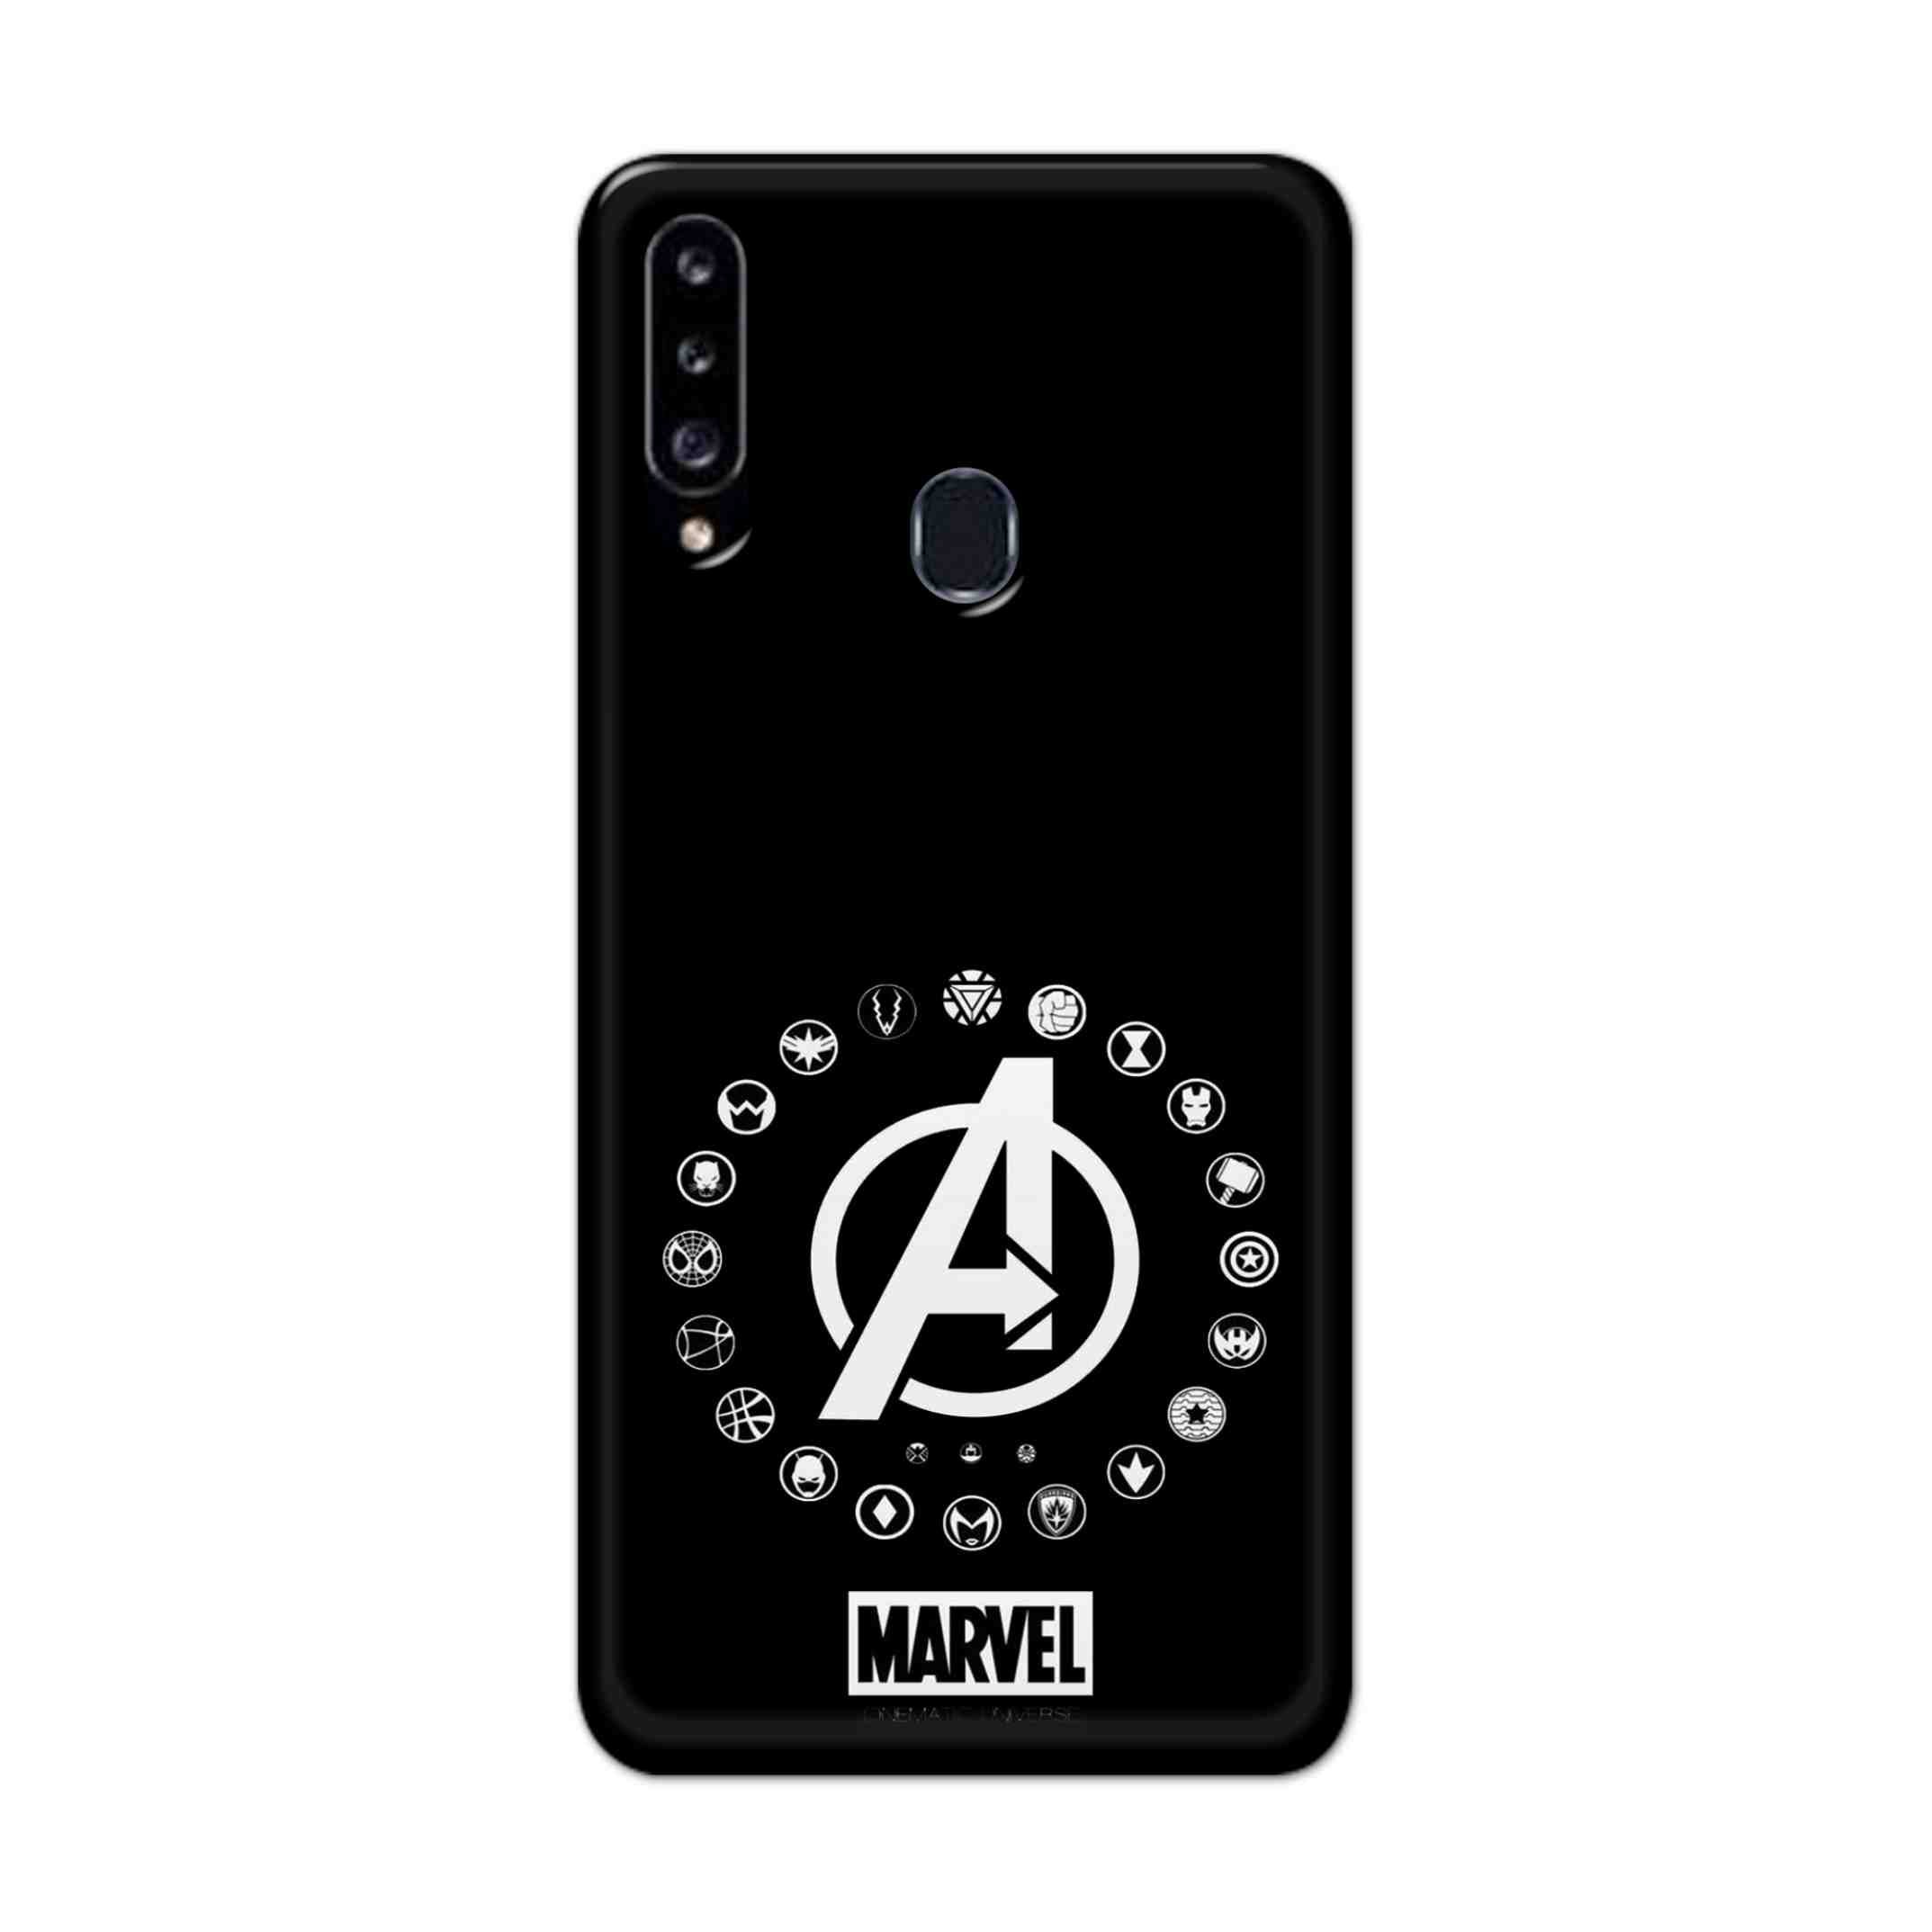 Buy Avengers Hard Back Mobile Phone Case Cover For Samsung Galaxy A21 Online